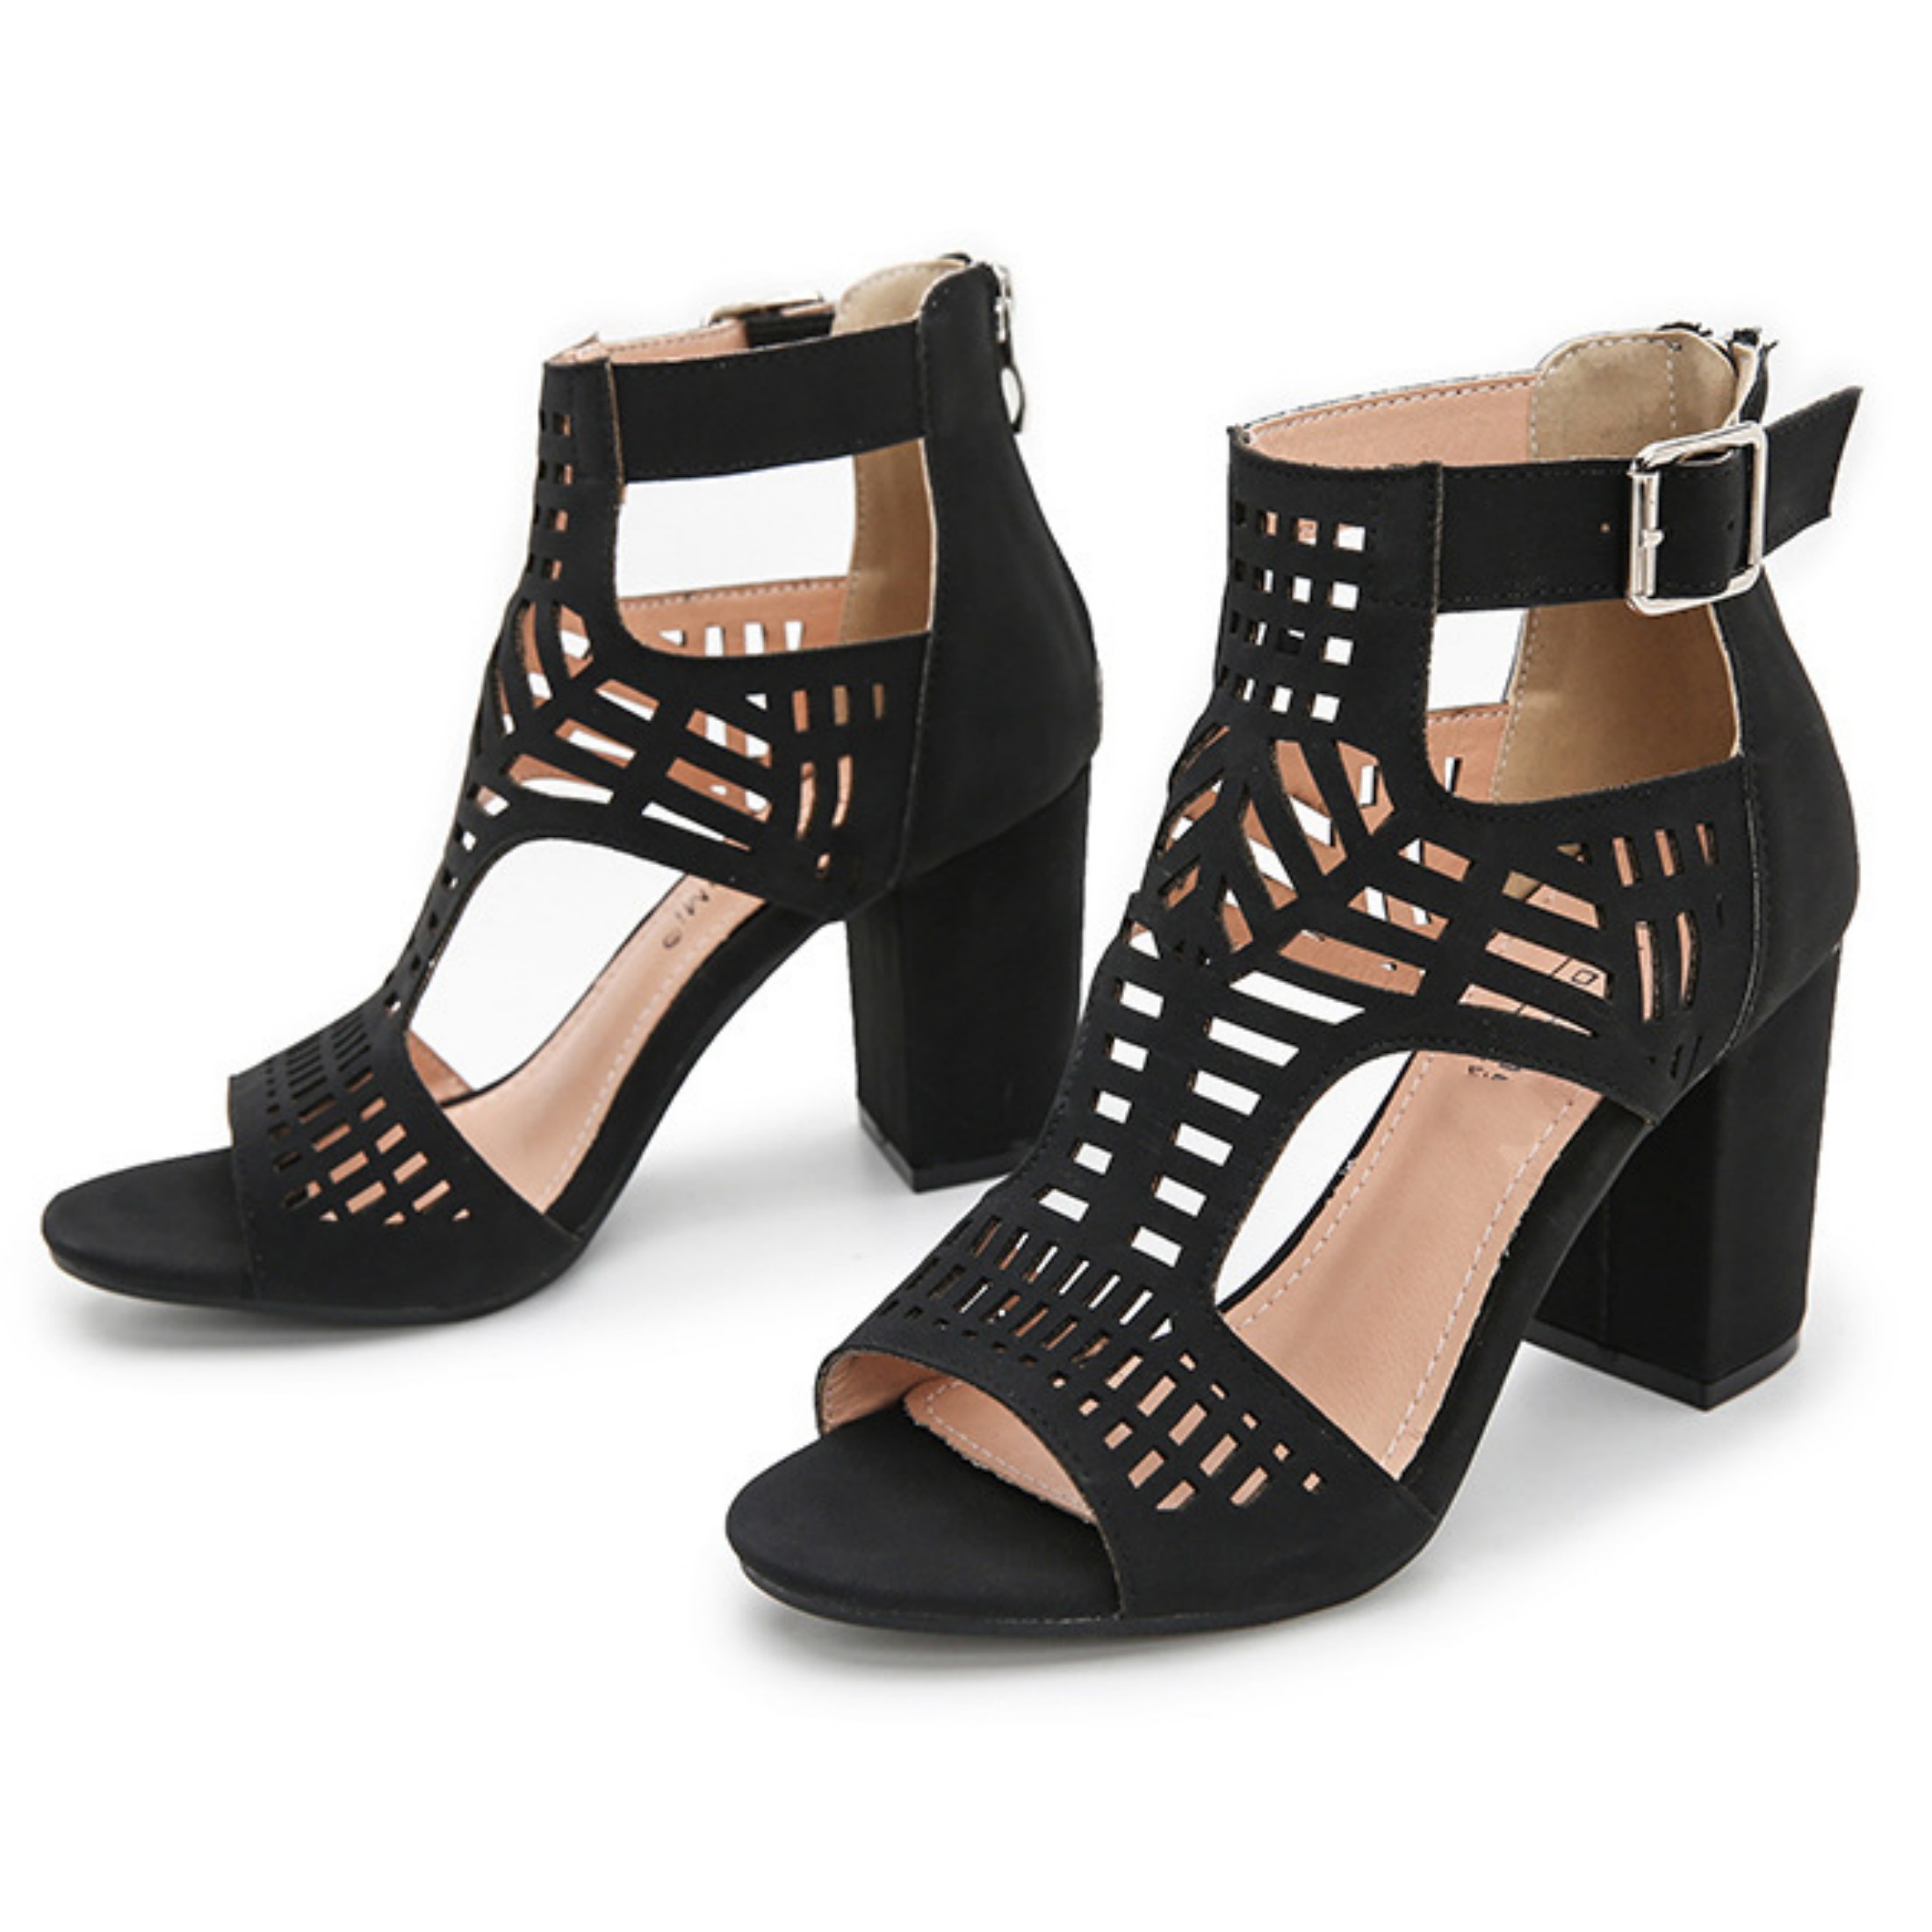 Women's Chunky High Heel Sandals Ankle Strap Open Toe Dress Shoes ...